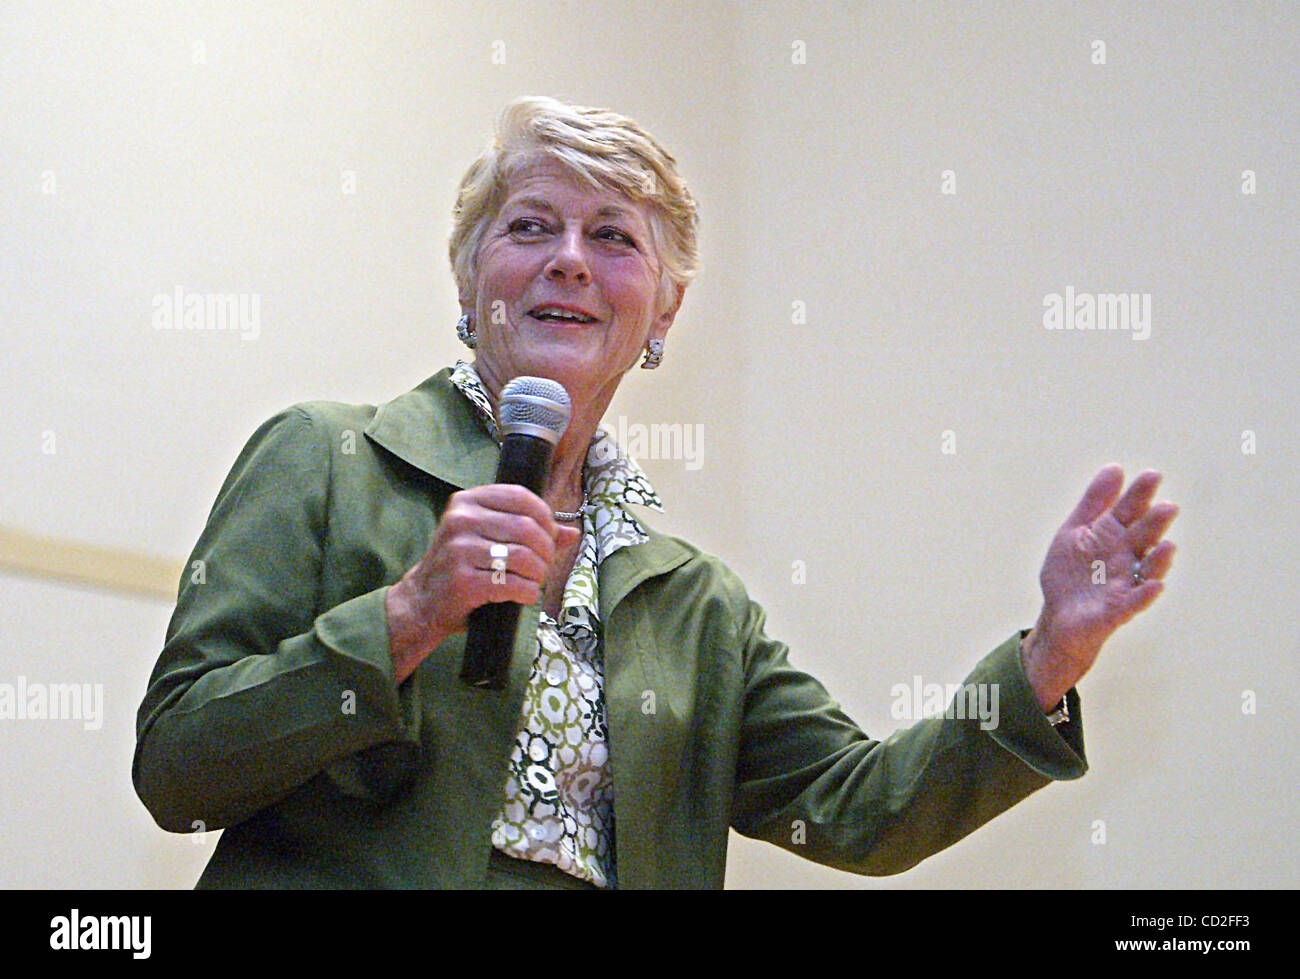 Mar 13, 2008 - Washington, District of Columbia, USA - Former congresswoman and vice-presidential candidate GERALDINE FERRARO, who said she raised about $125,000 for Clinton's campaign, has resigned from Sen. Hillary Clinton's presidential campaign. Ferraro said that Obama's strategist misinterprete Stock Photo